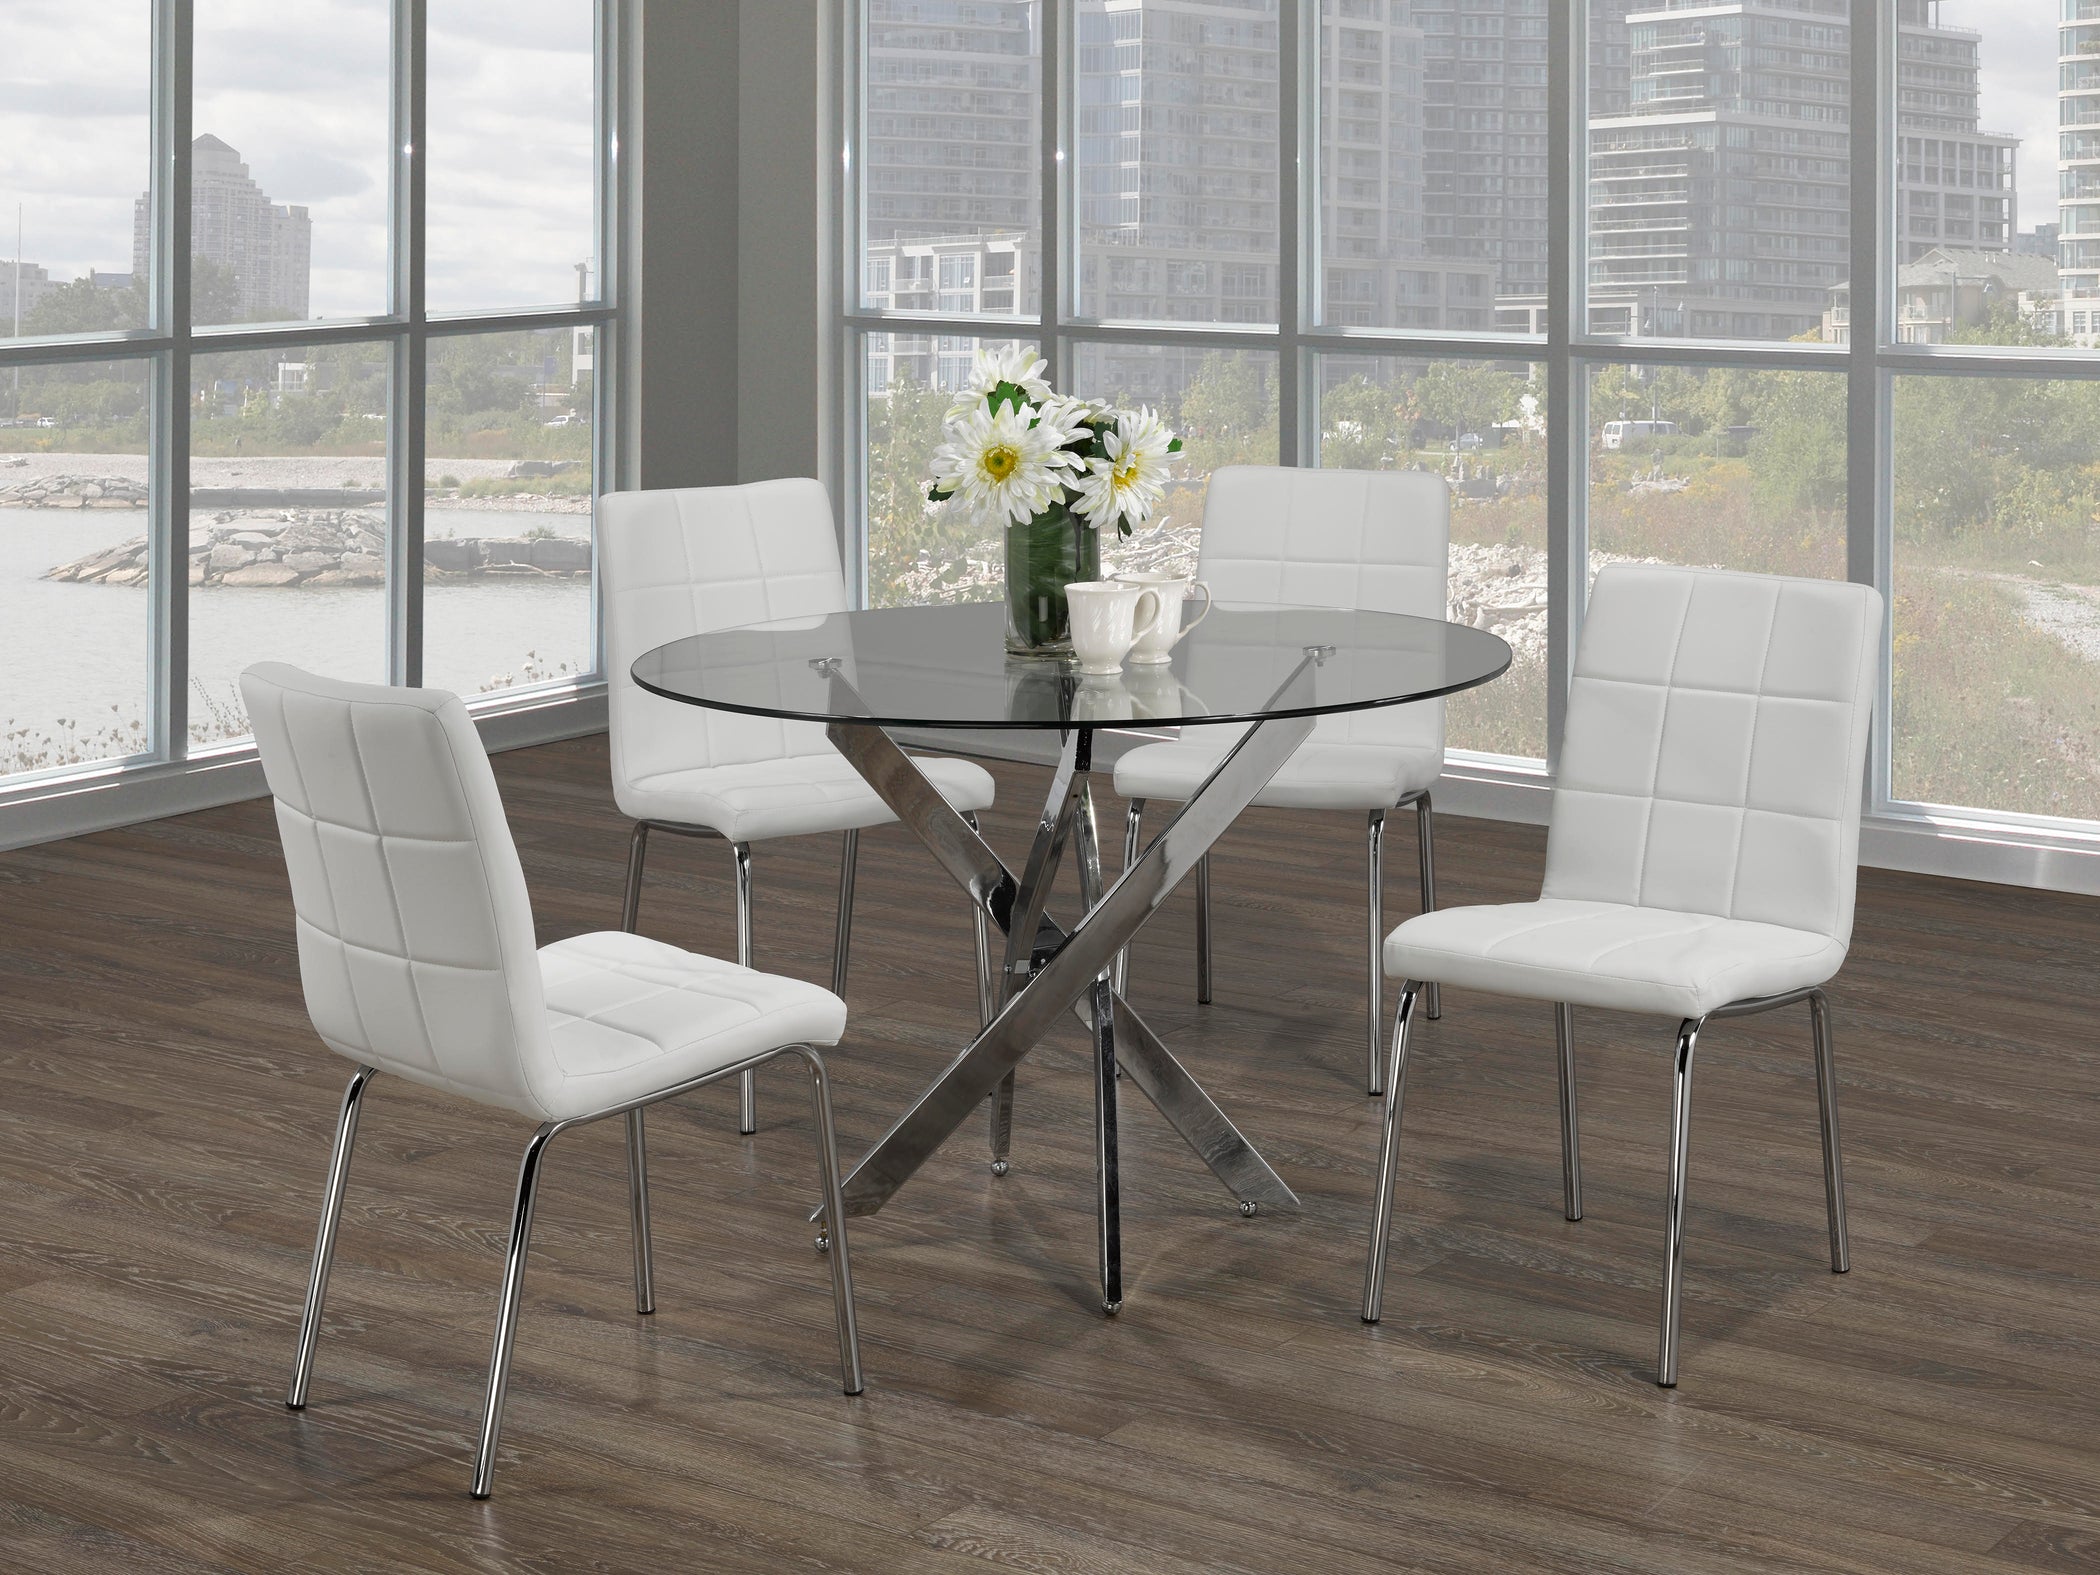 Wesr Elm Glass And Chrome Dining Room Table